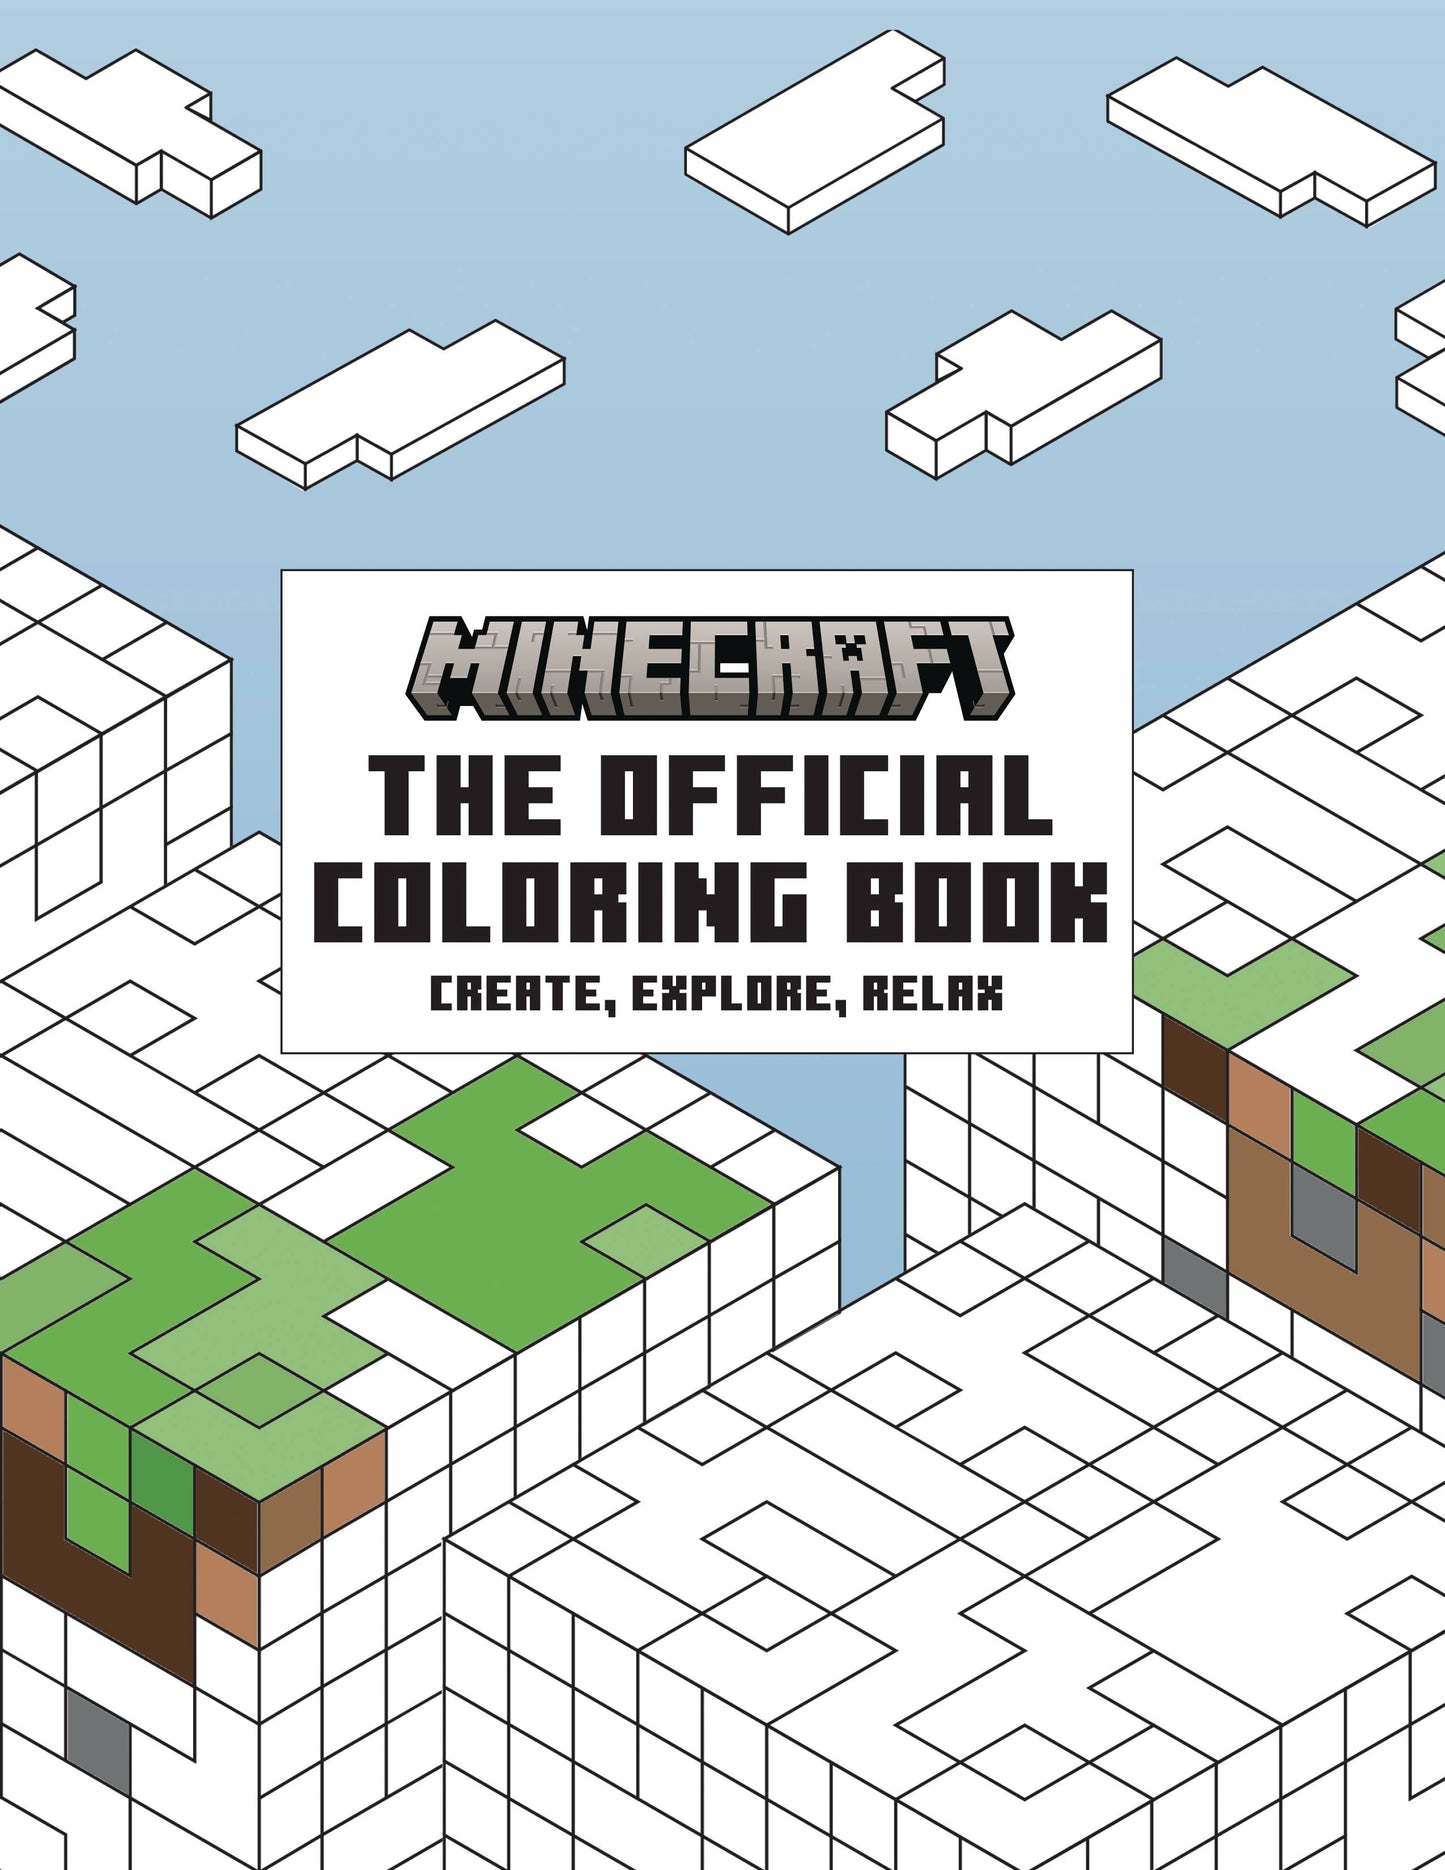 MINECRAFT OFFICIAL COLORING BOOK (C: 0-1-0)